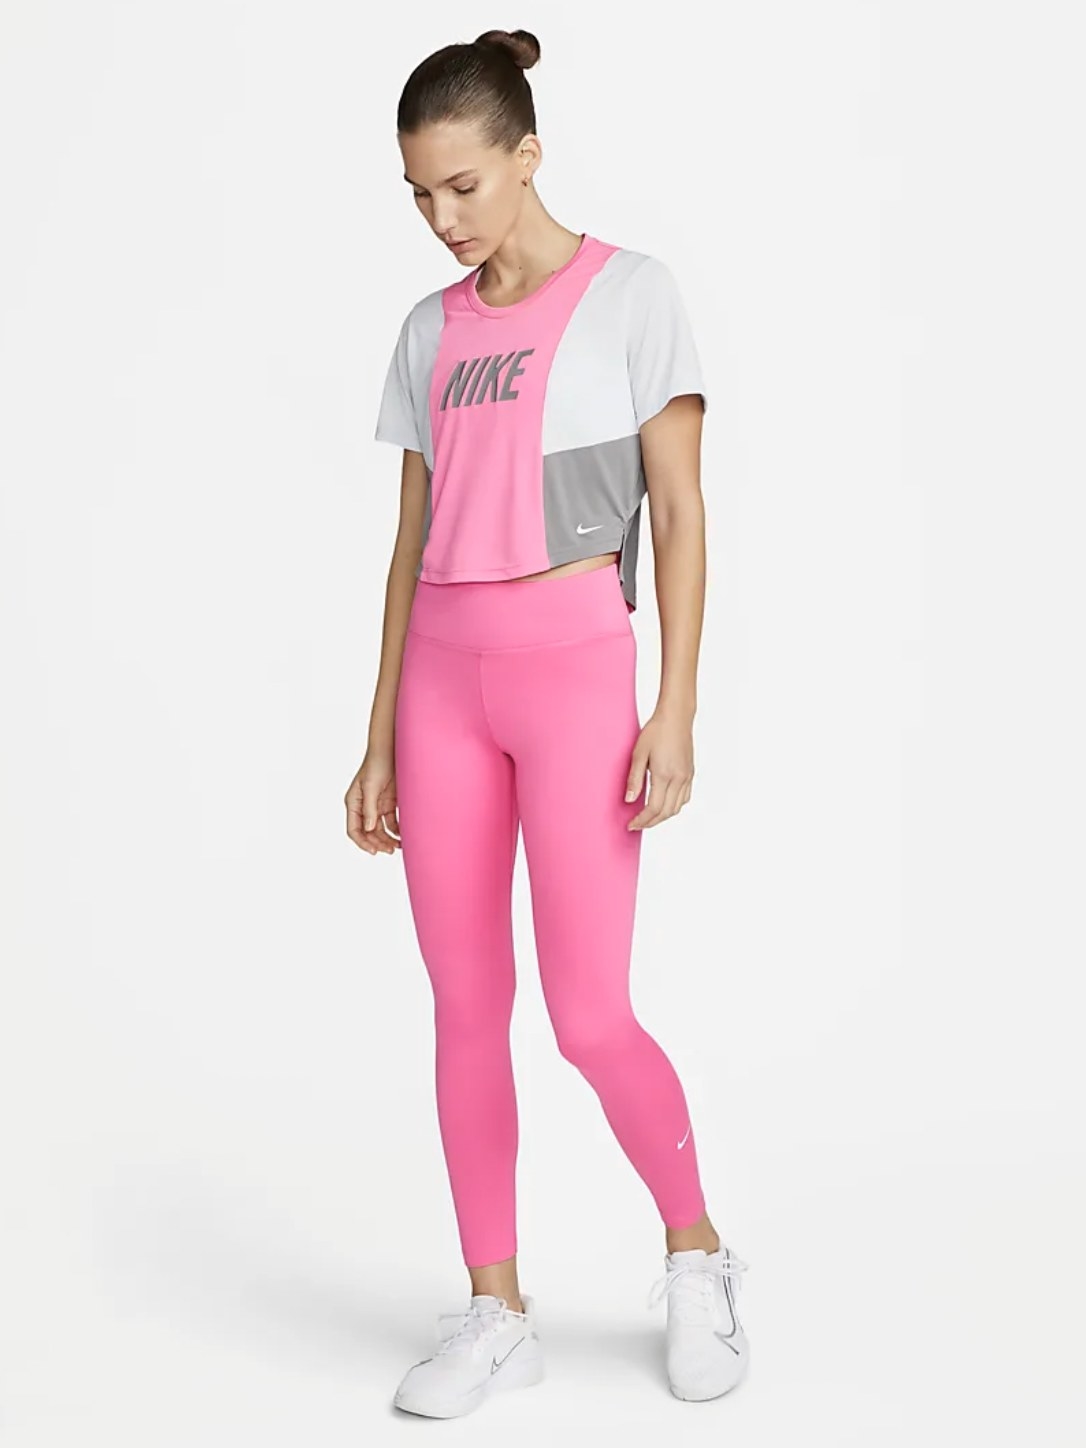 Model in the pink athletic tights